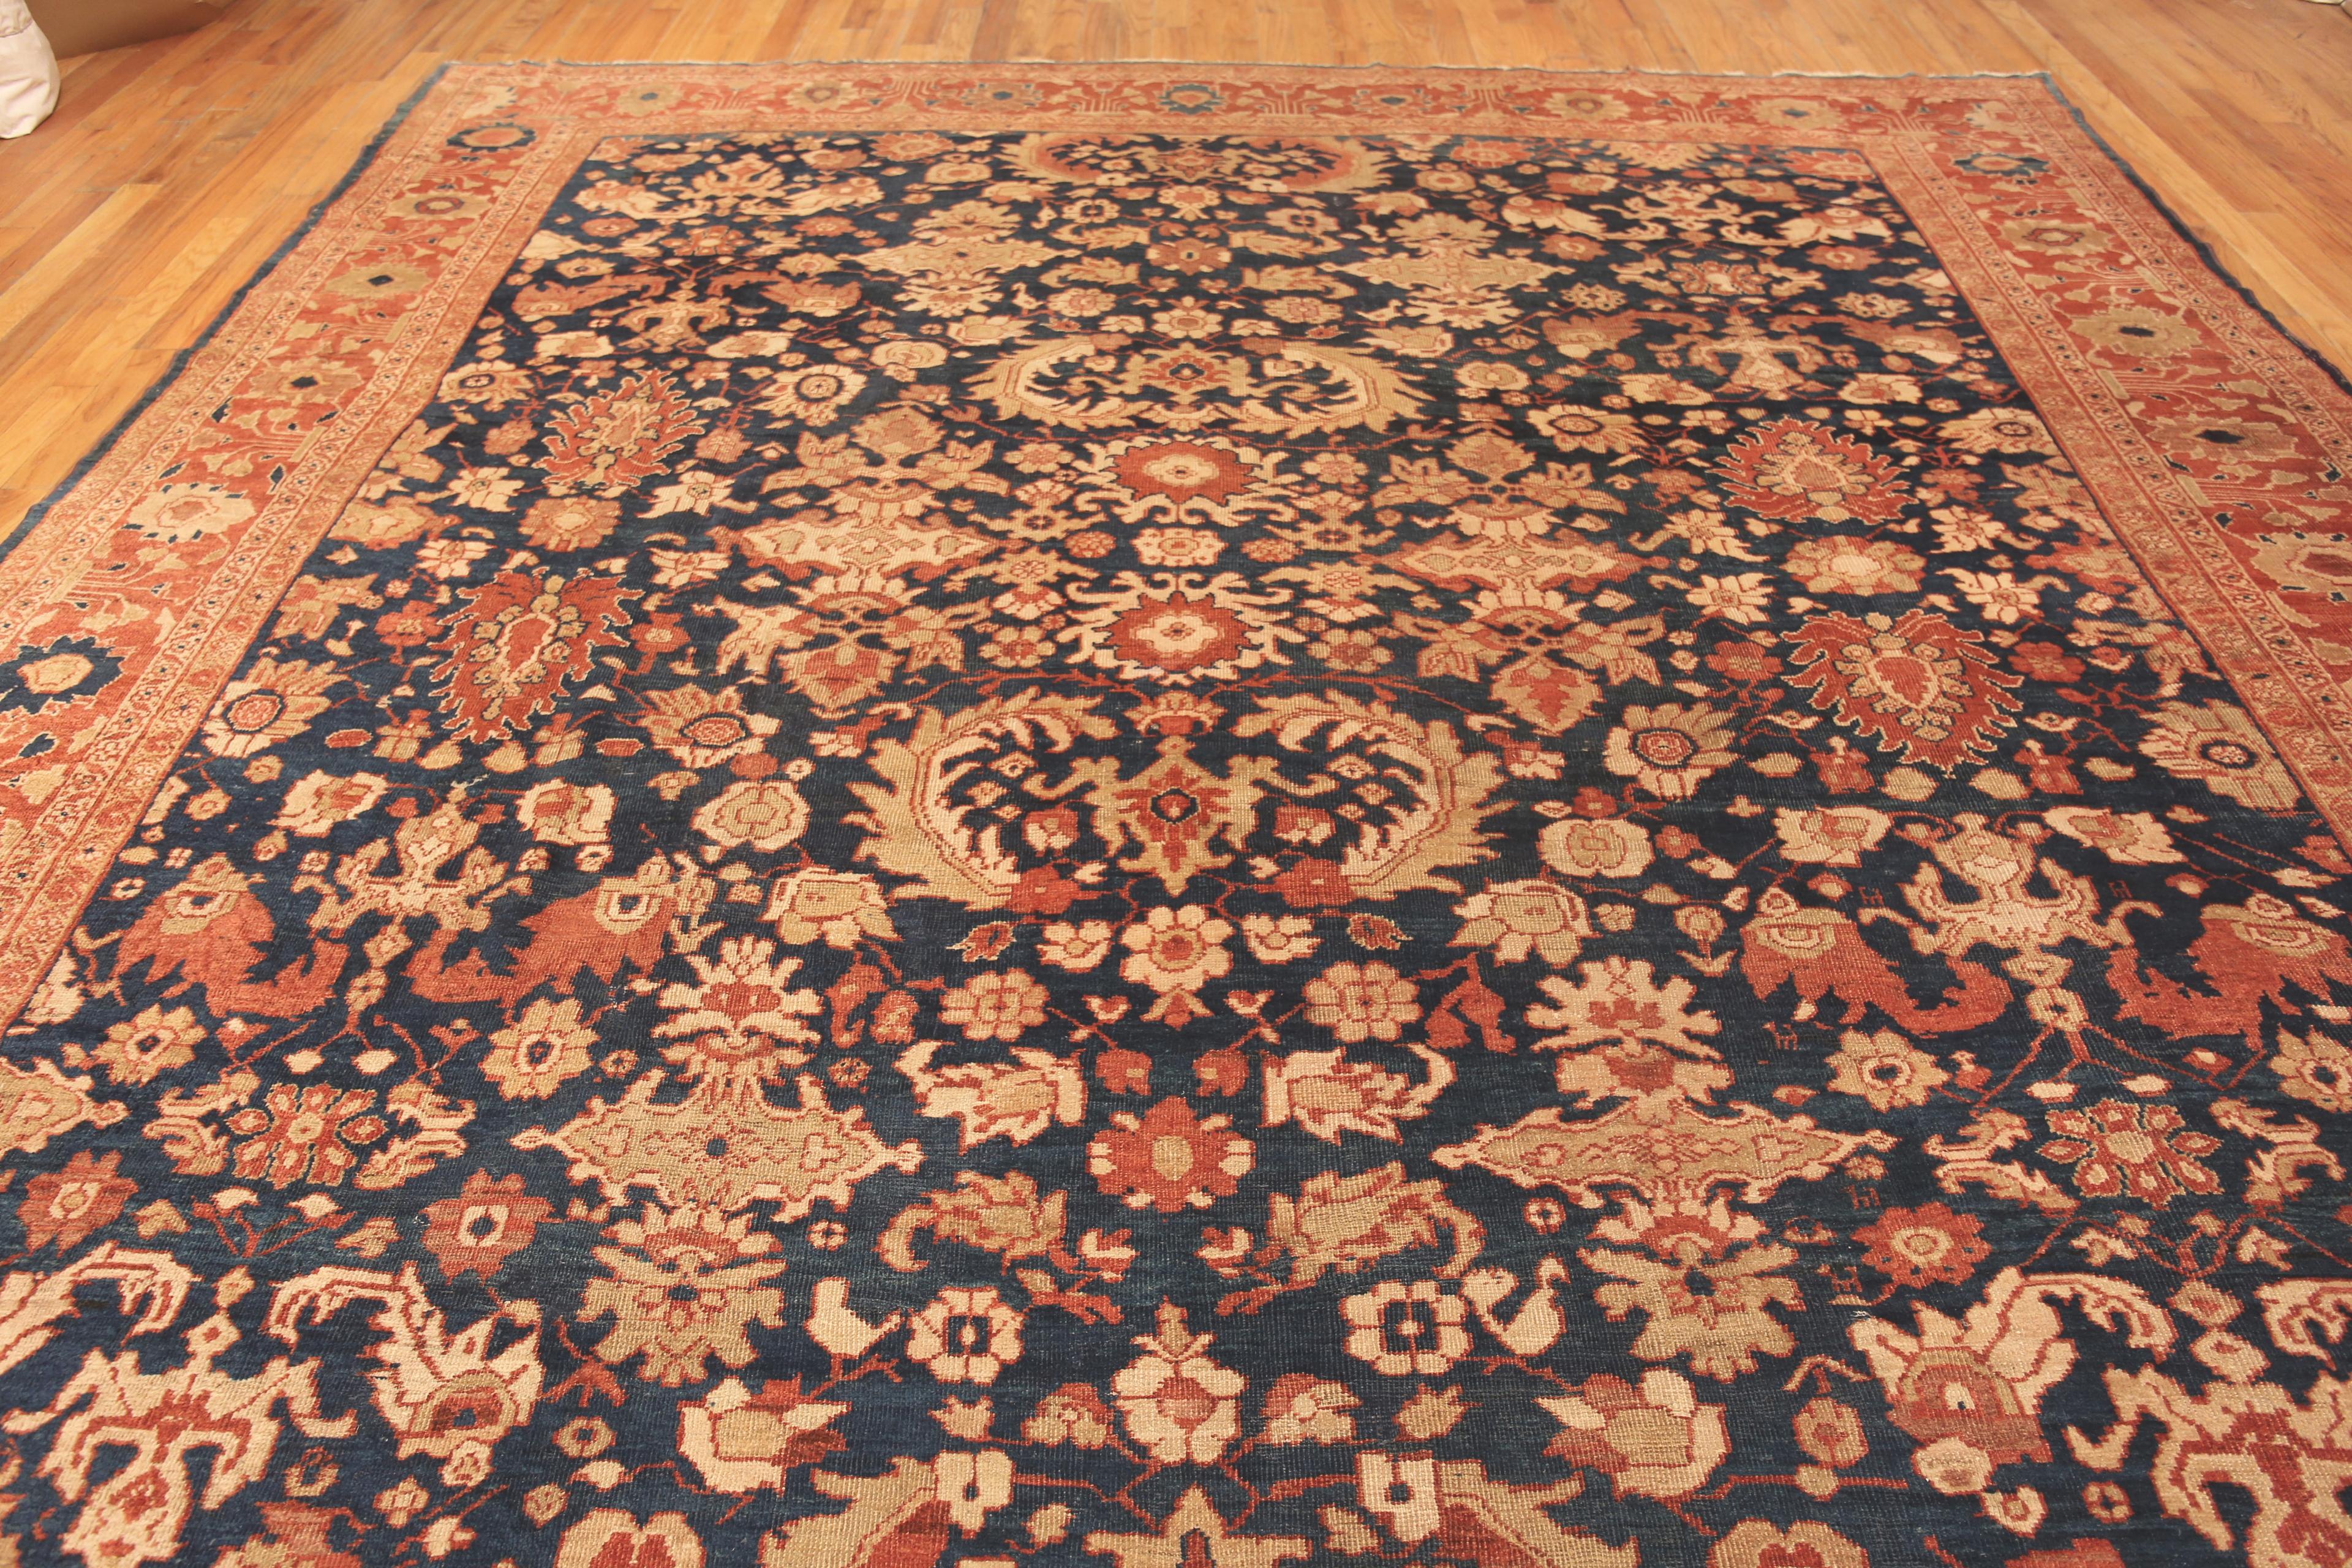 Antique Blue Persian Sultanabad Rug, Country of Origin: Persian rugs, Circa date: 1900. Size: 12 ft 2 in x 14 ft 2 in (3.71 m x 4.32 m)